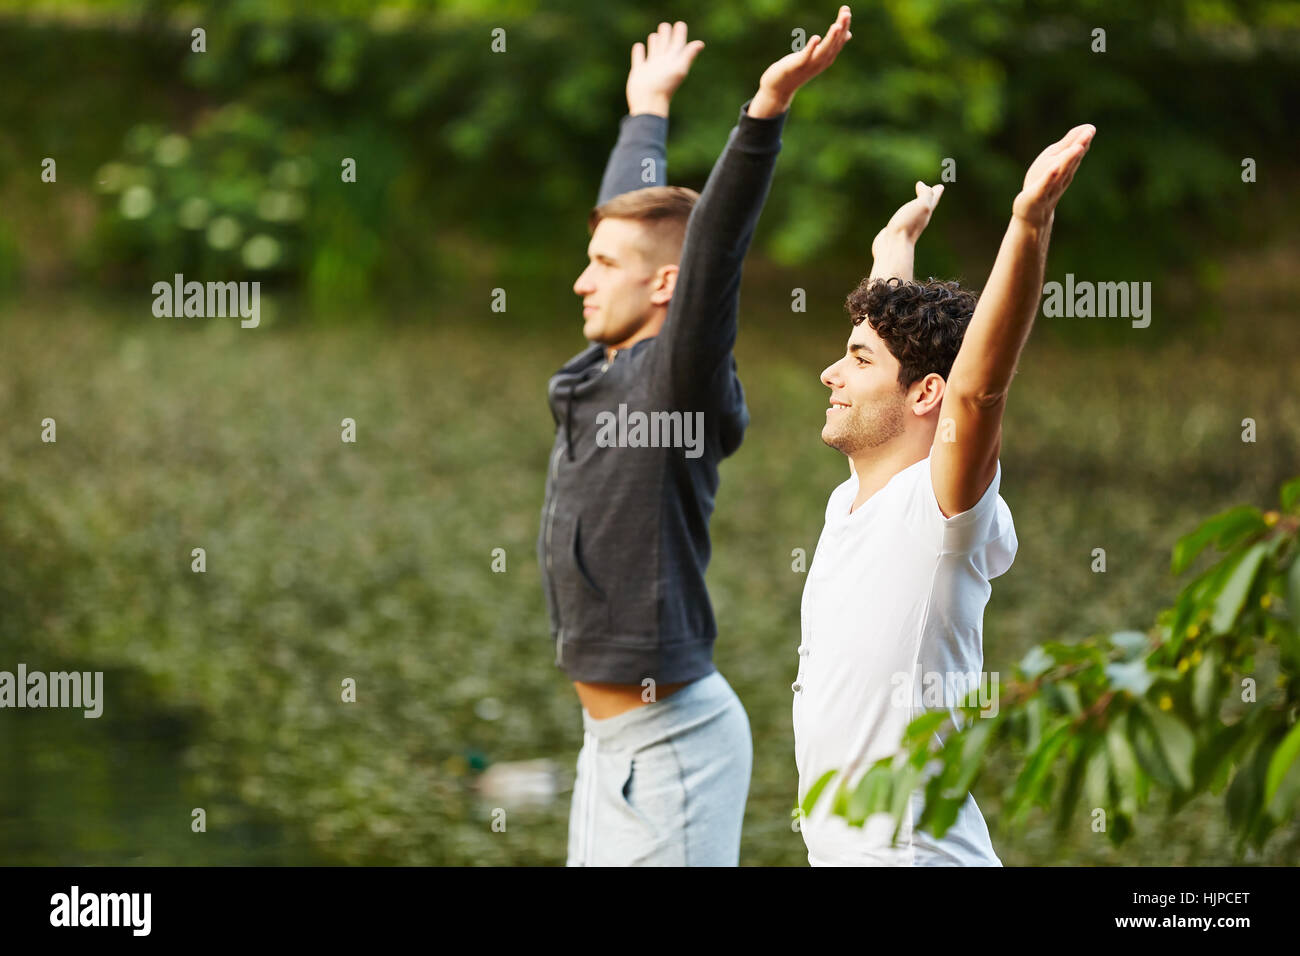 Men doing stretching exercise for warm up Stock Photo